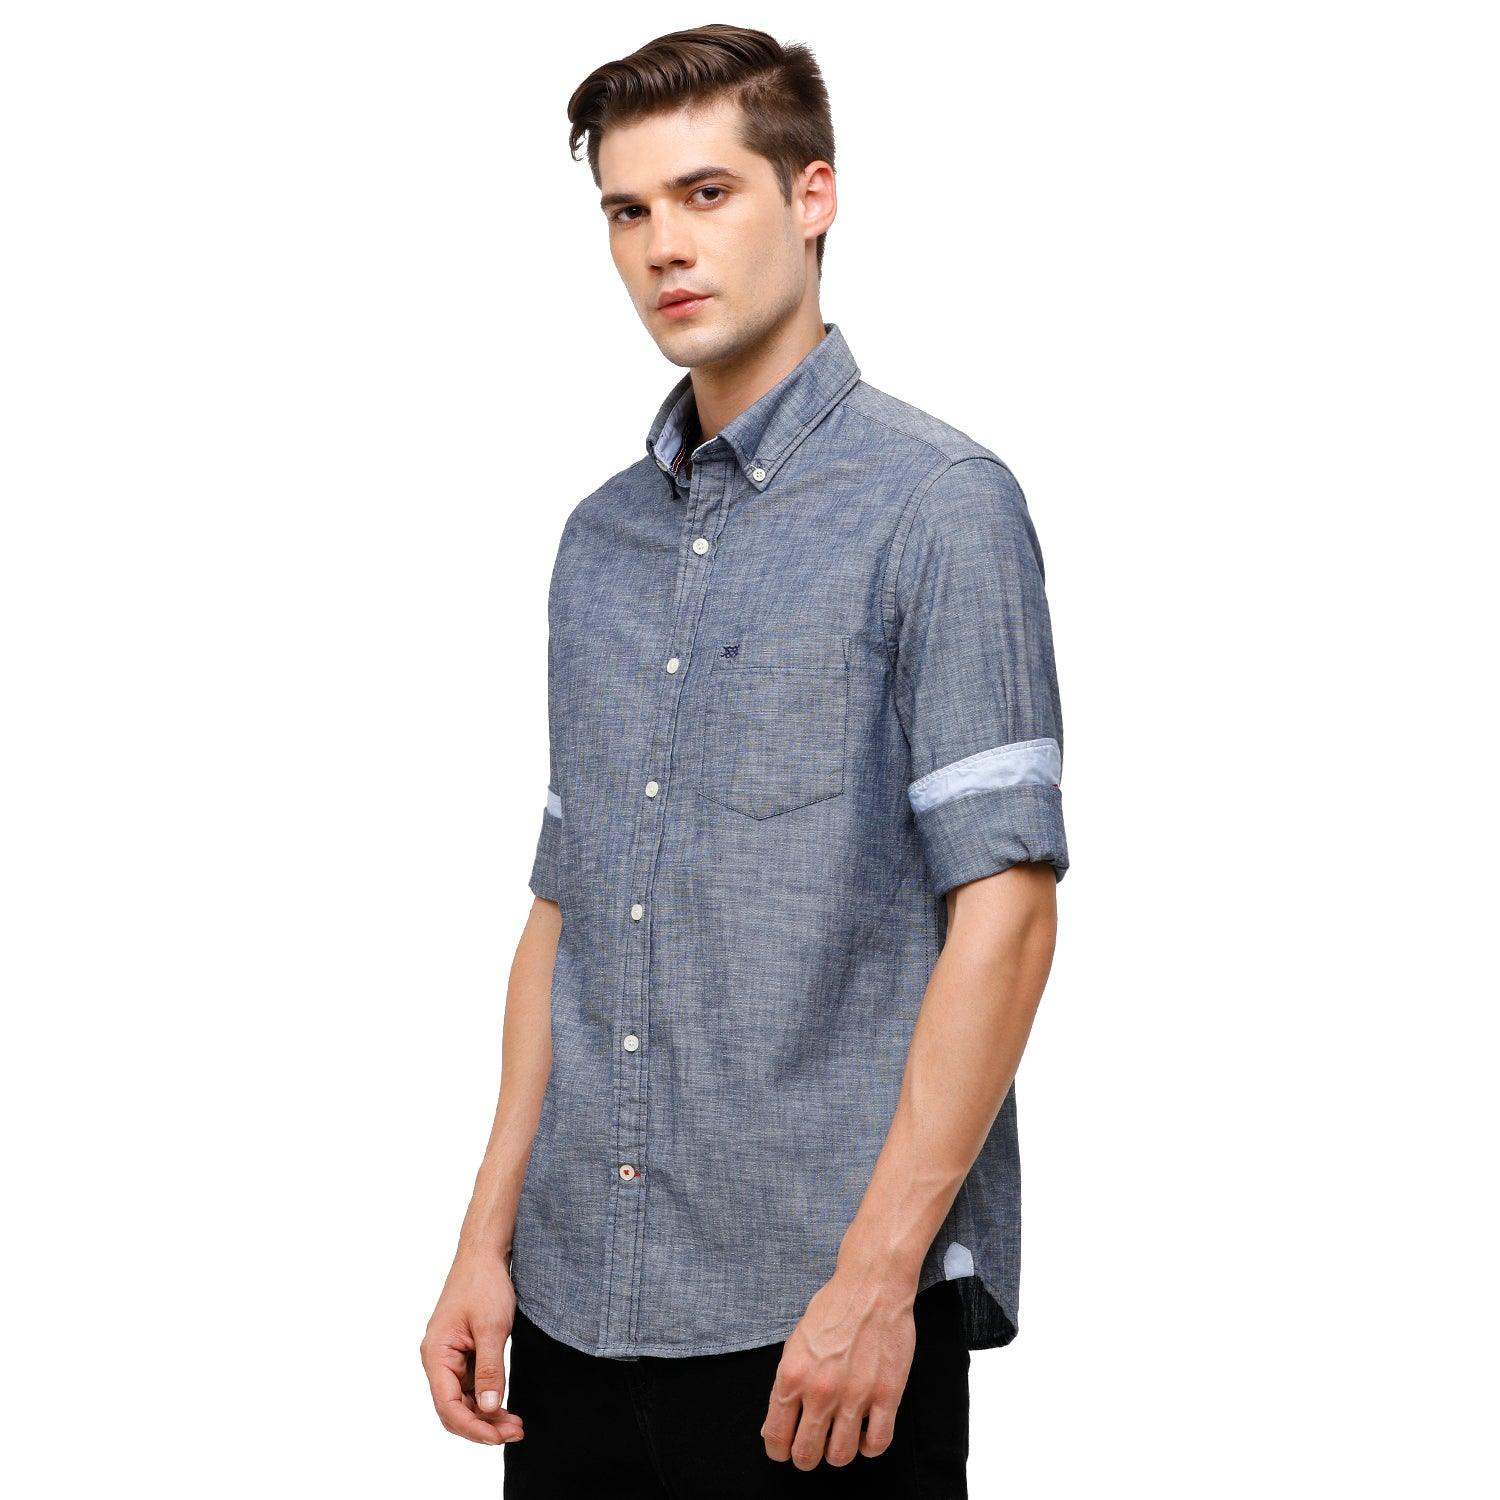 Grey Solid Casual Shirt Slim Fit - Double Two